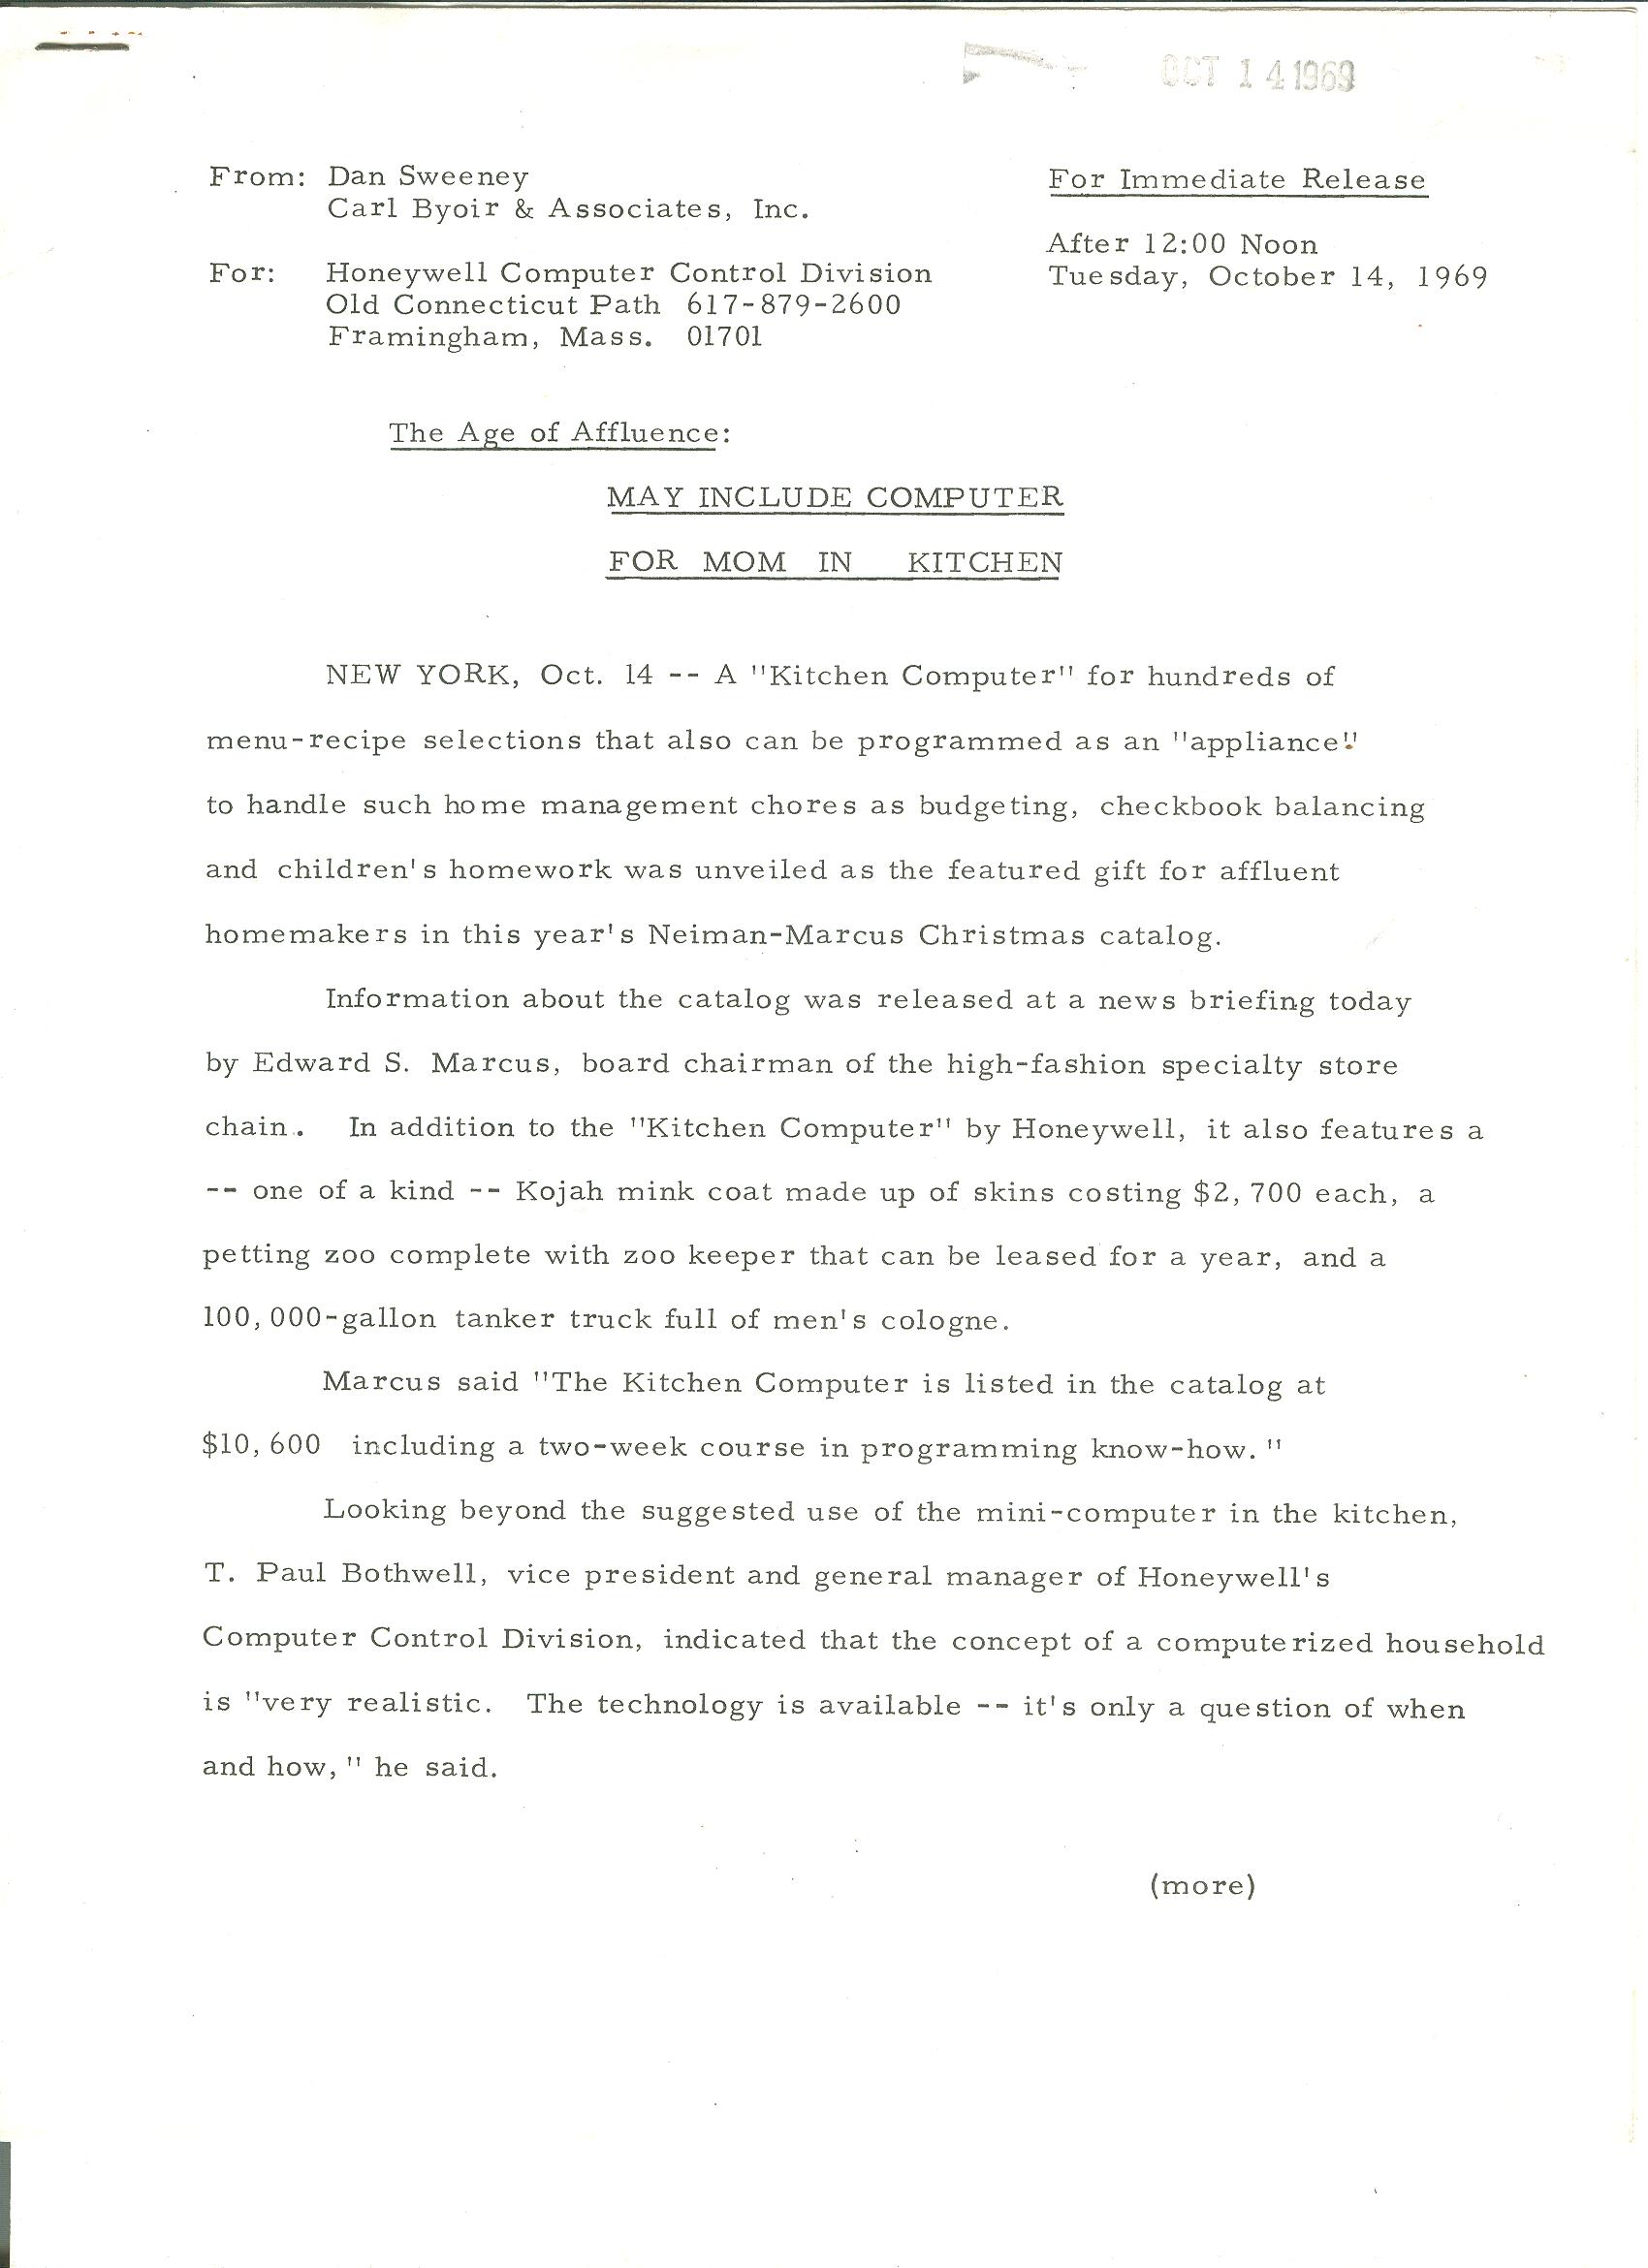 Press release for the Kitchen Computer (Honeywell 316)